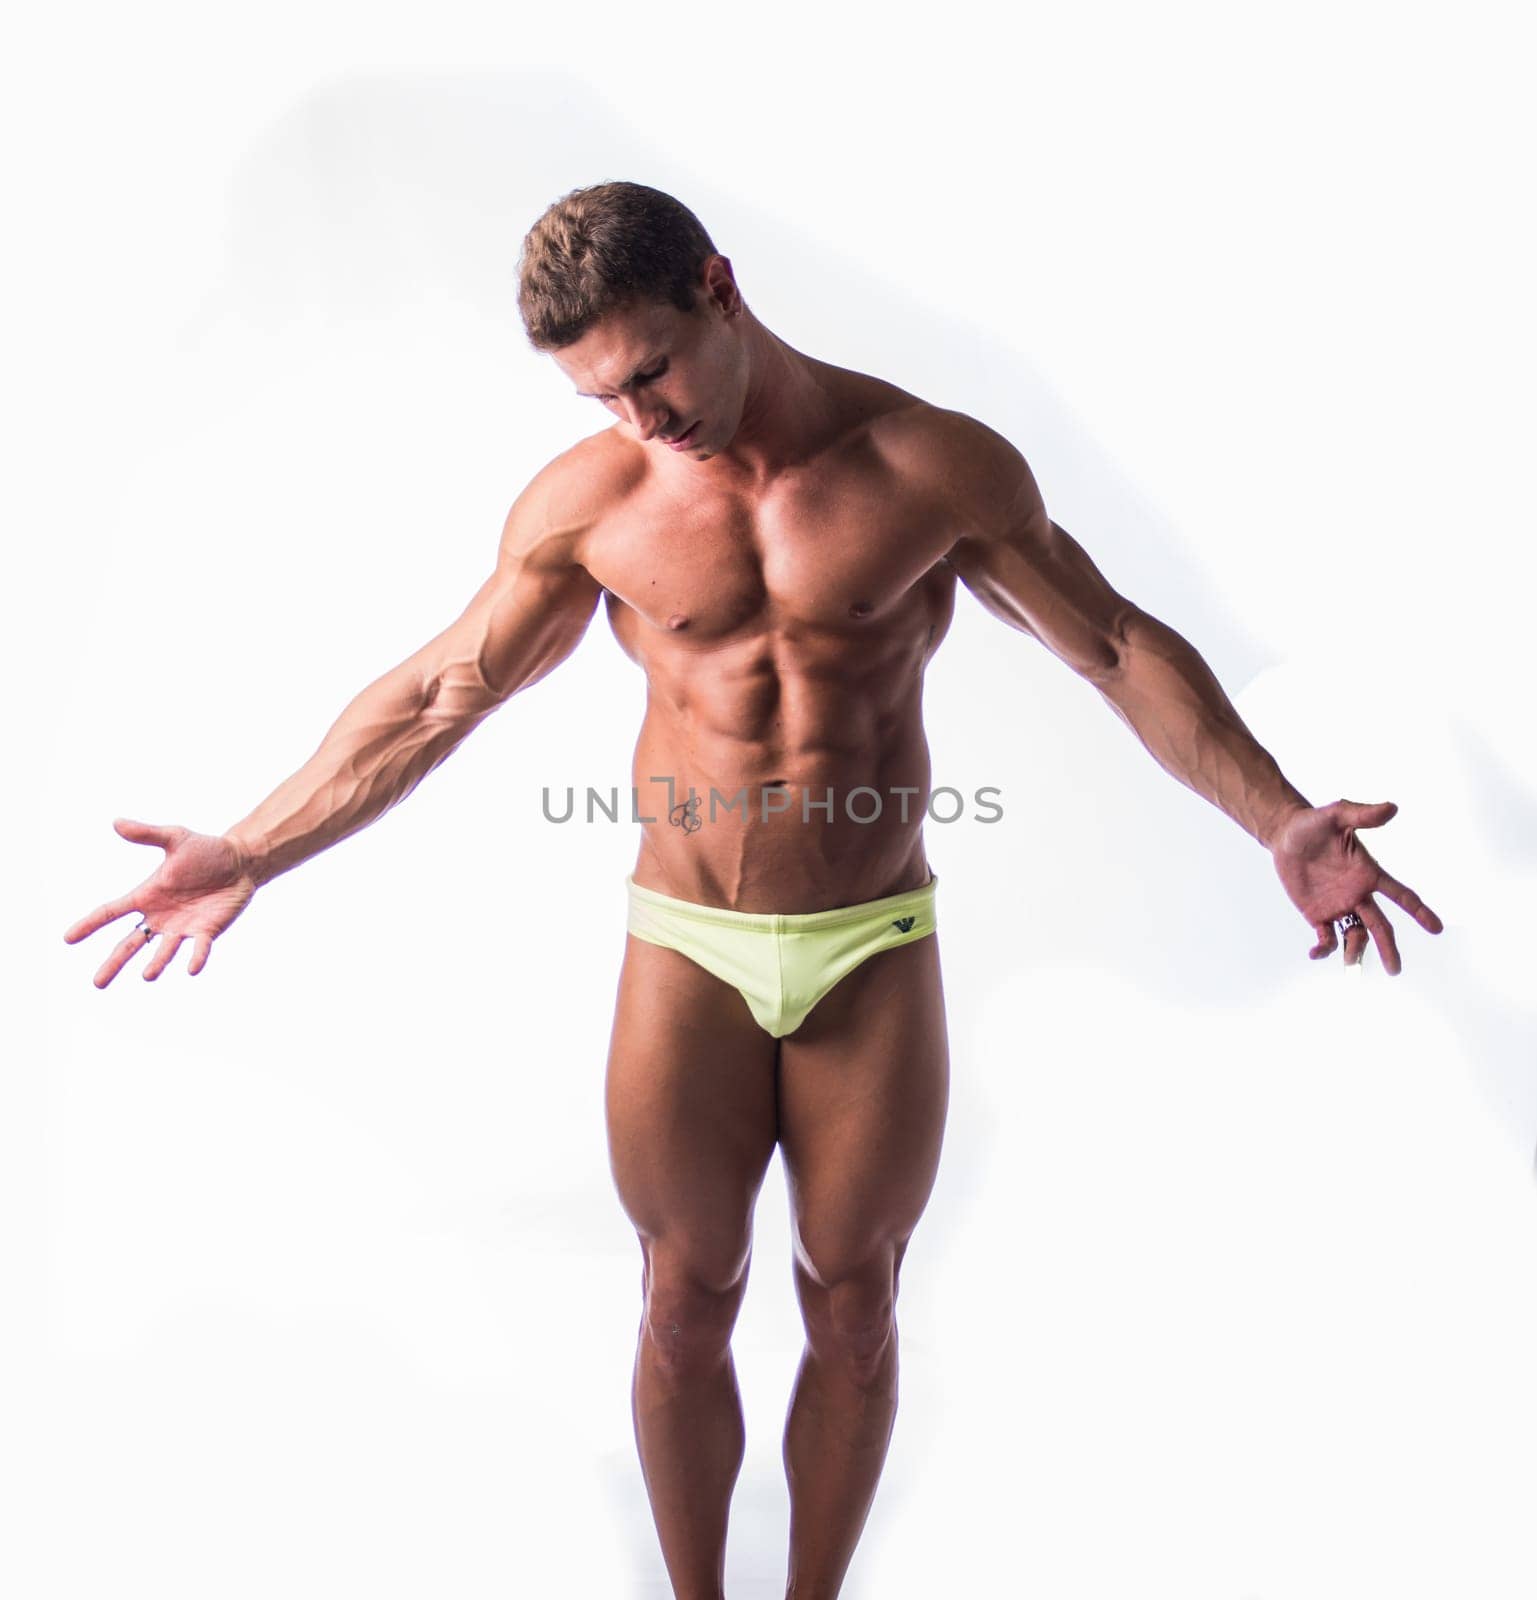 Man in yellow underwear posing for picture by artofphoto